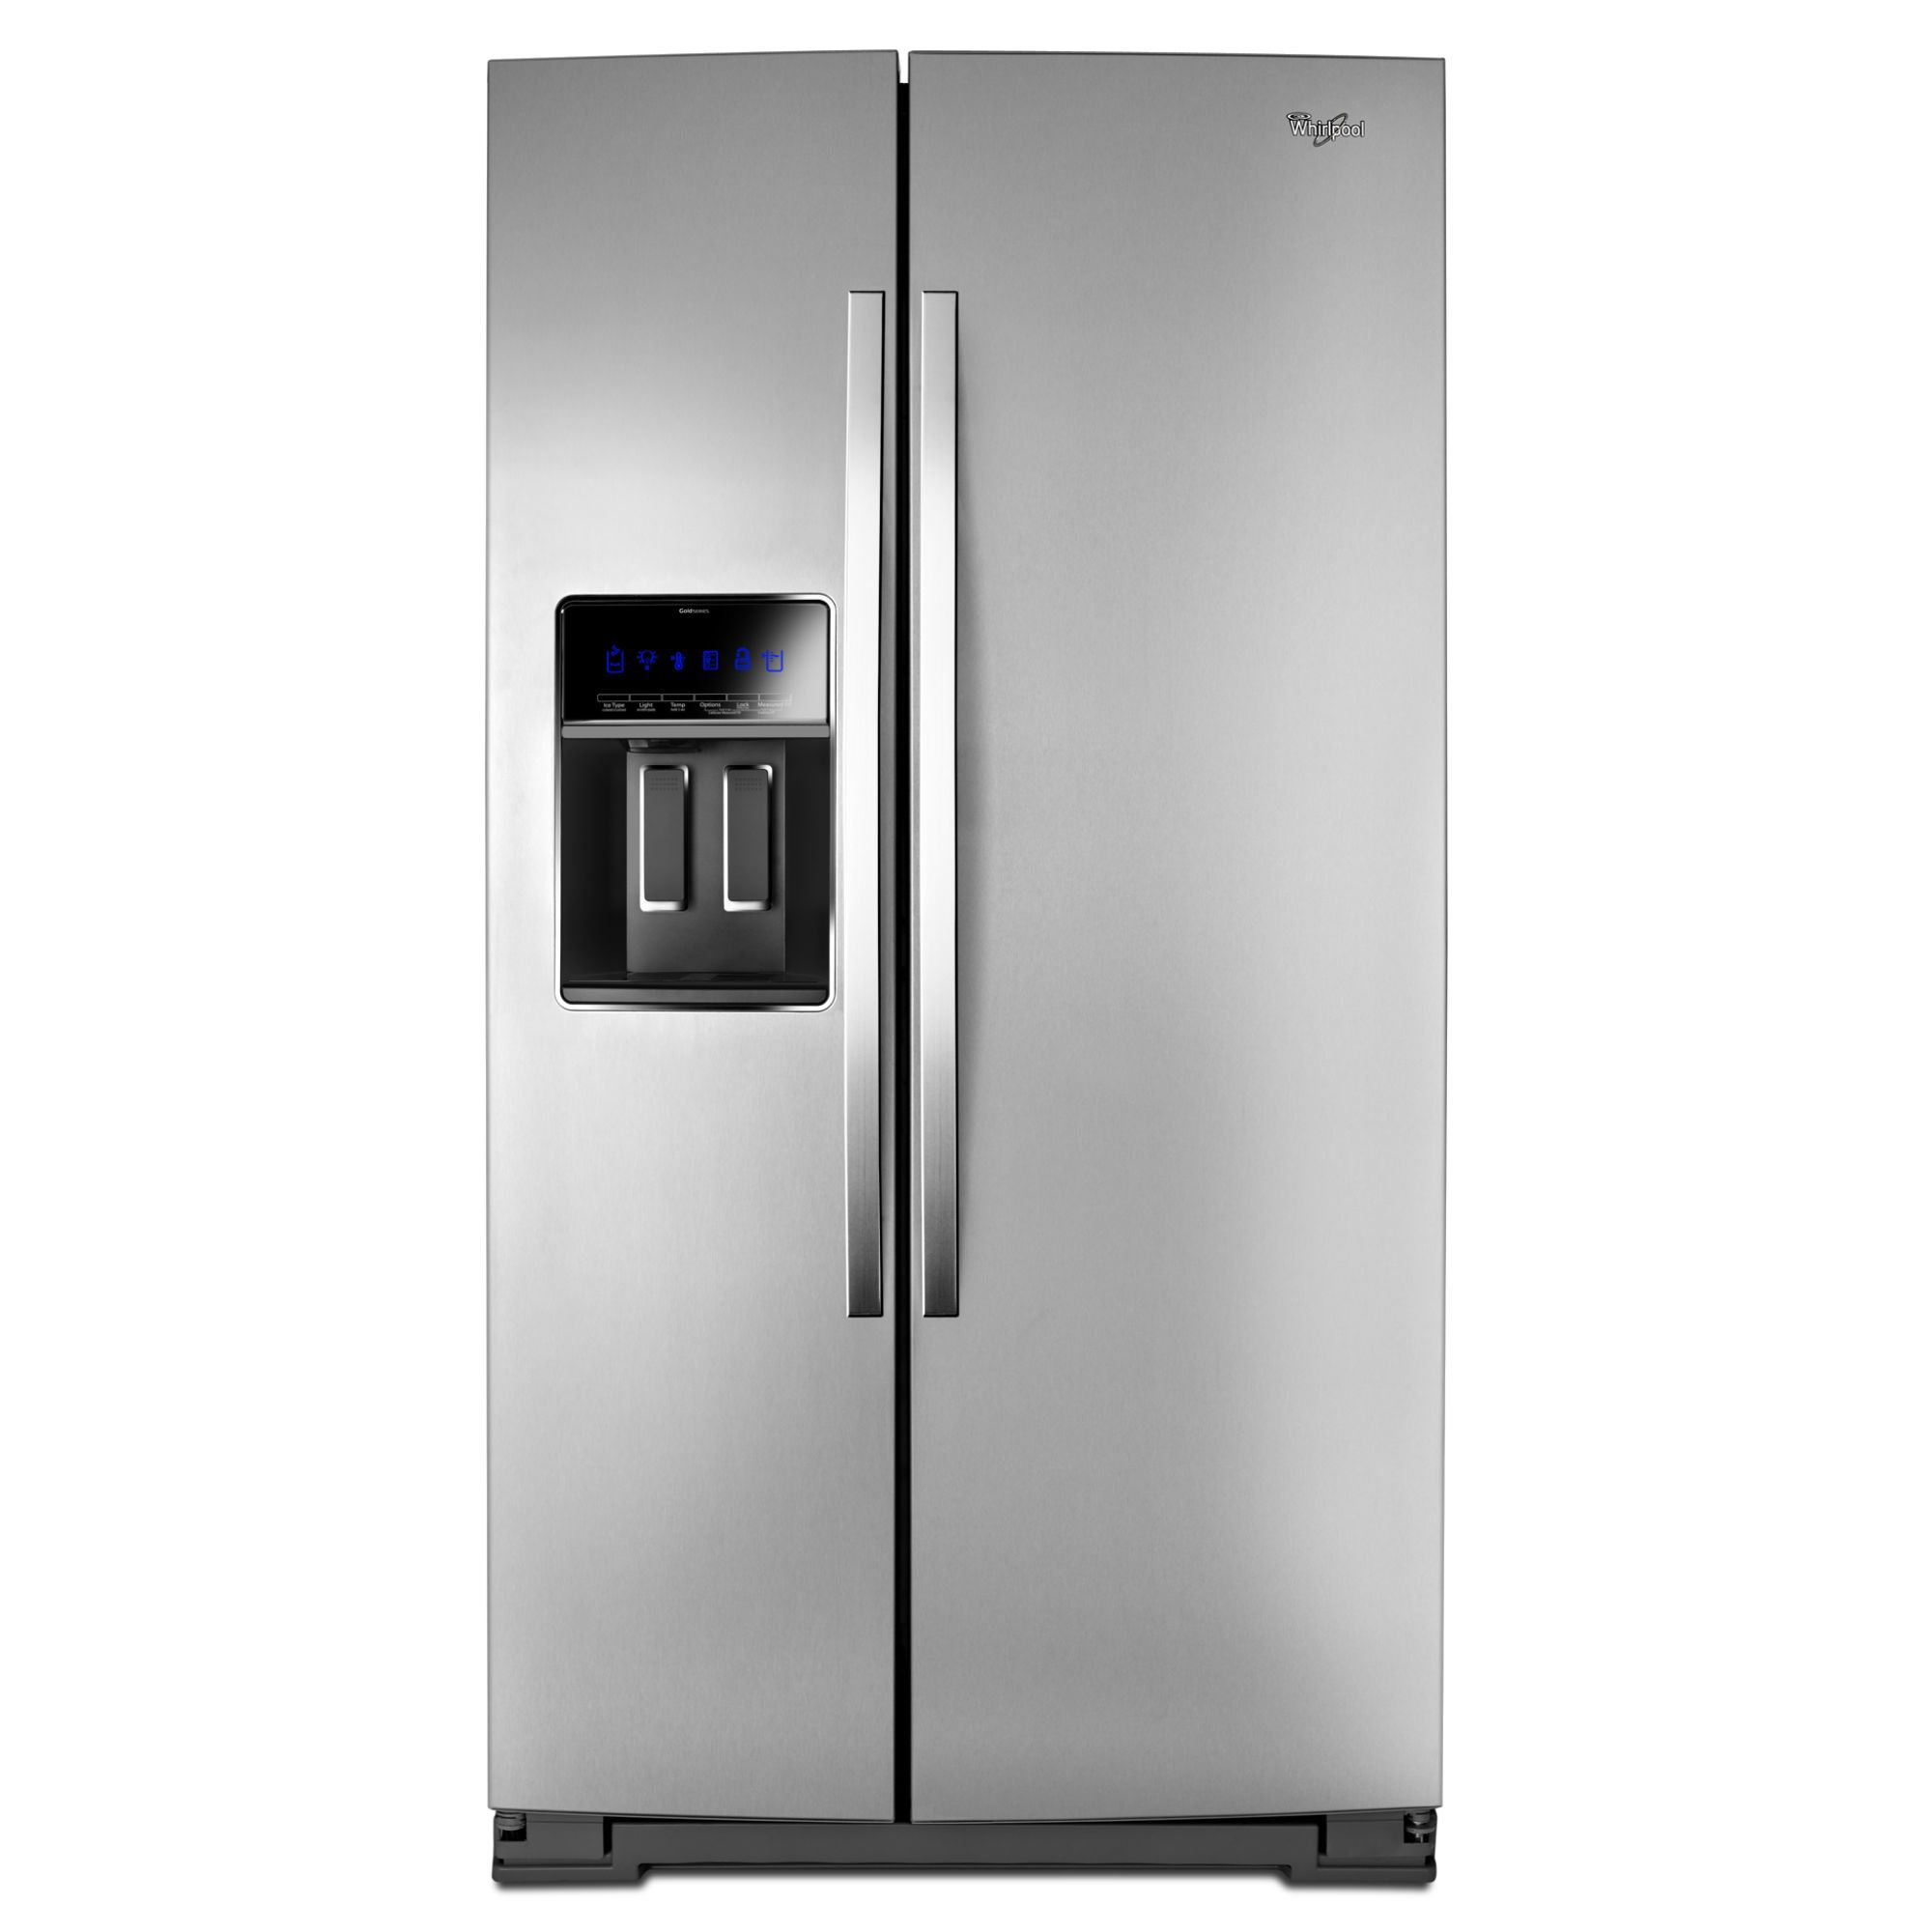 Whirlpool 24.5 cu. ft. Counter-Depth Side-by-Side Refrigerator w/ MicroEdge Shelves - Stainless Steel